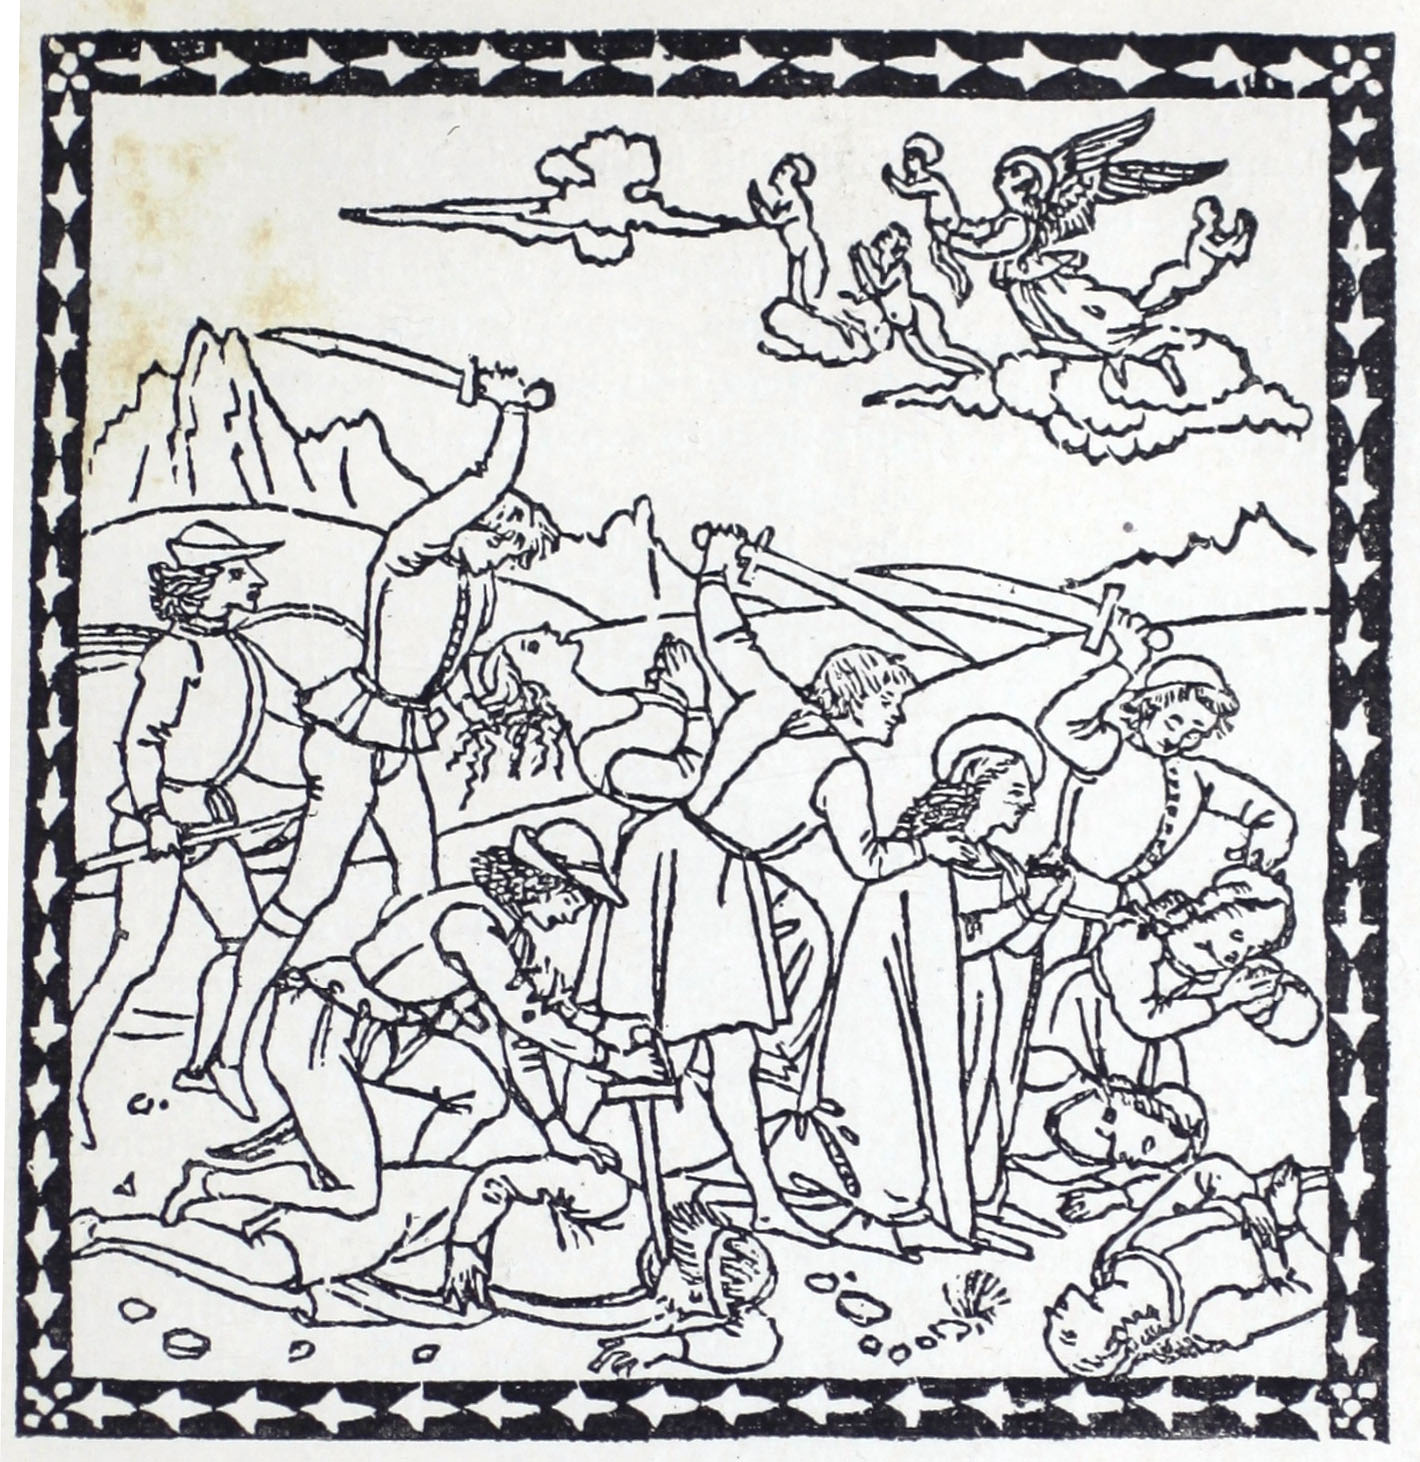 Wood engraved image shows a violent battle scene with men holding swords in a mountainous landscape. Above the battle, cherubs and angels float in the clouds with their hands pressed together in prayer position. 